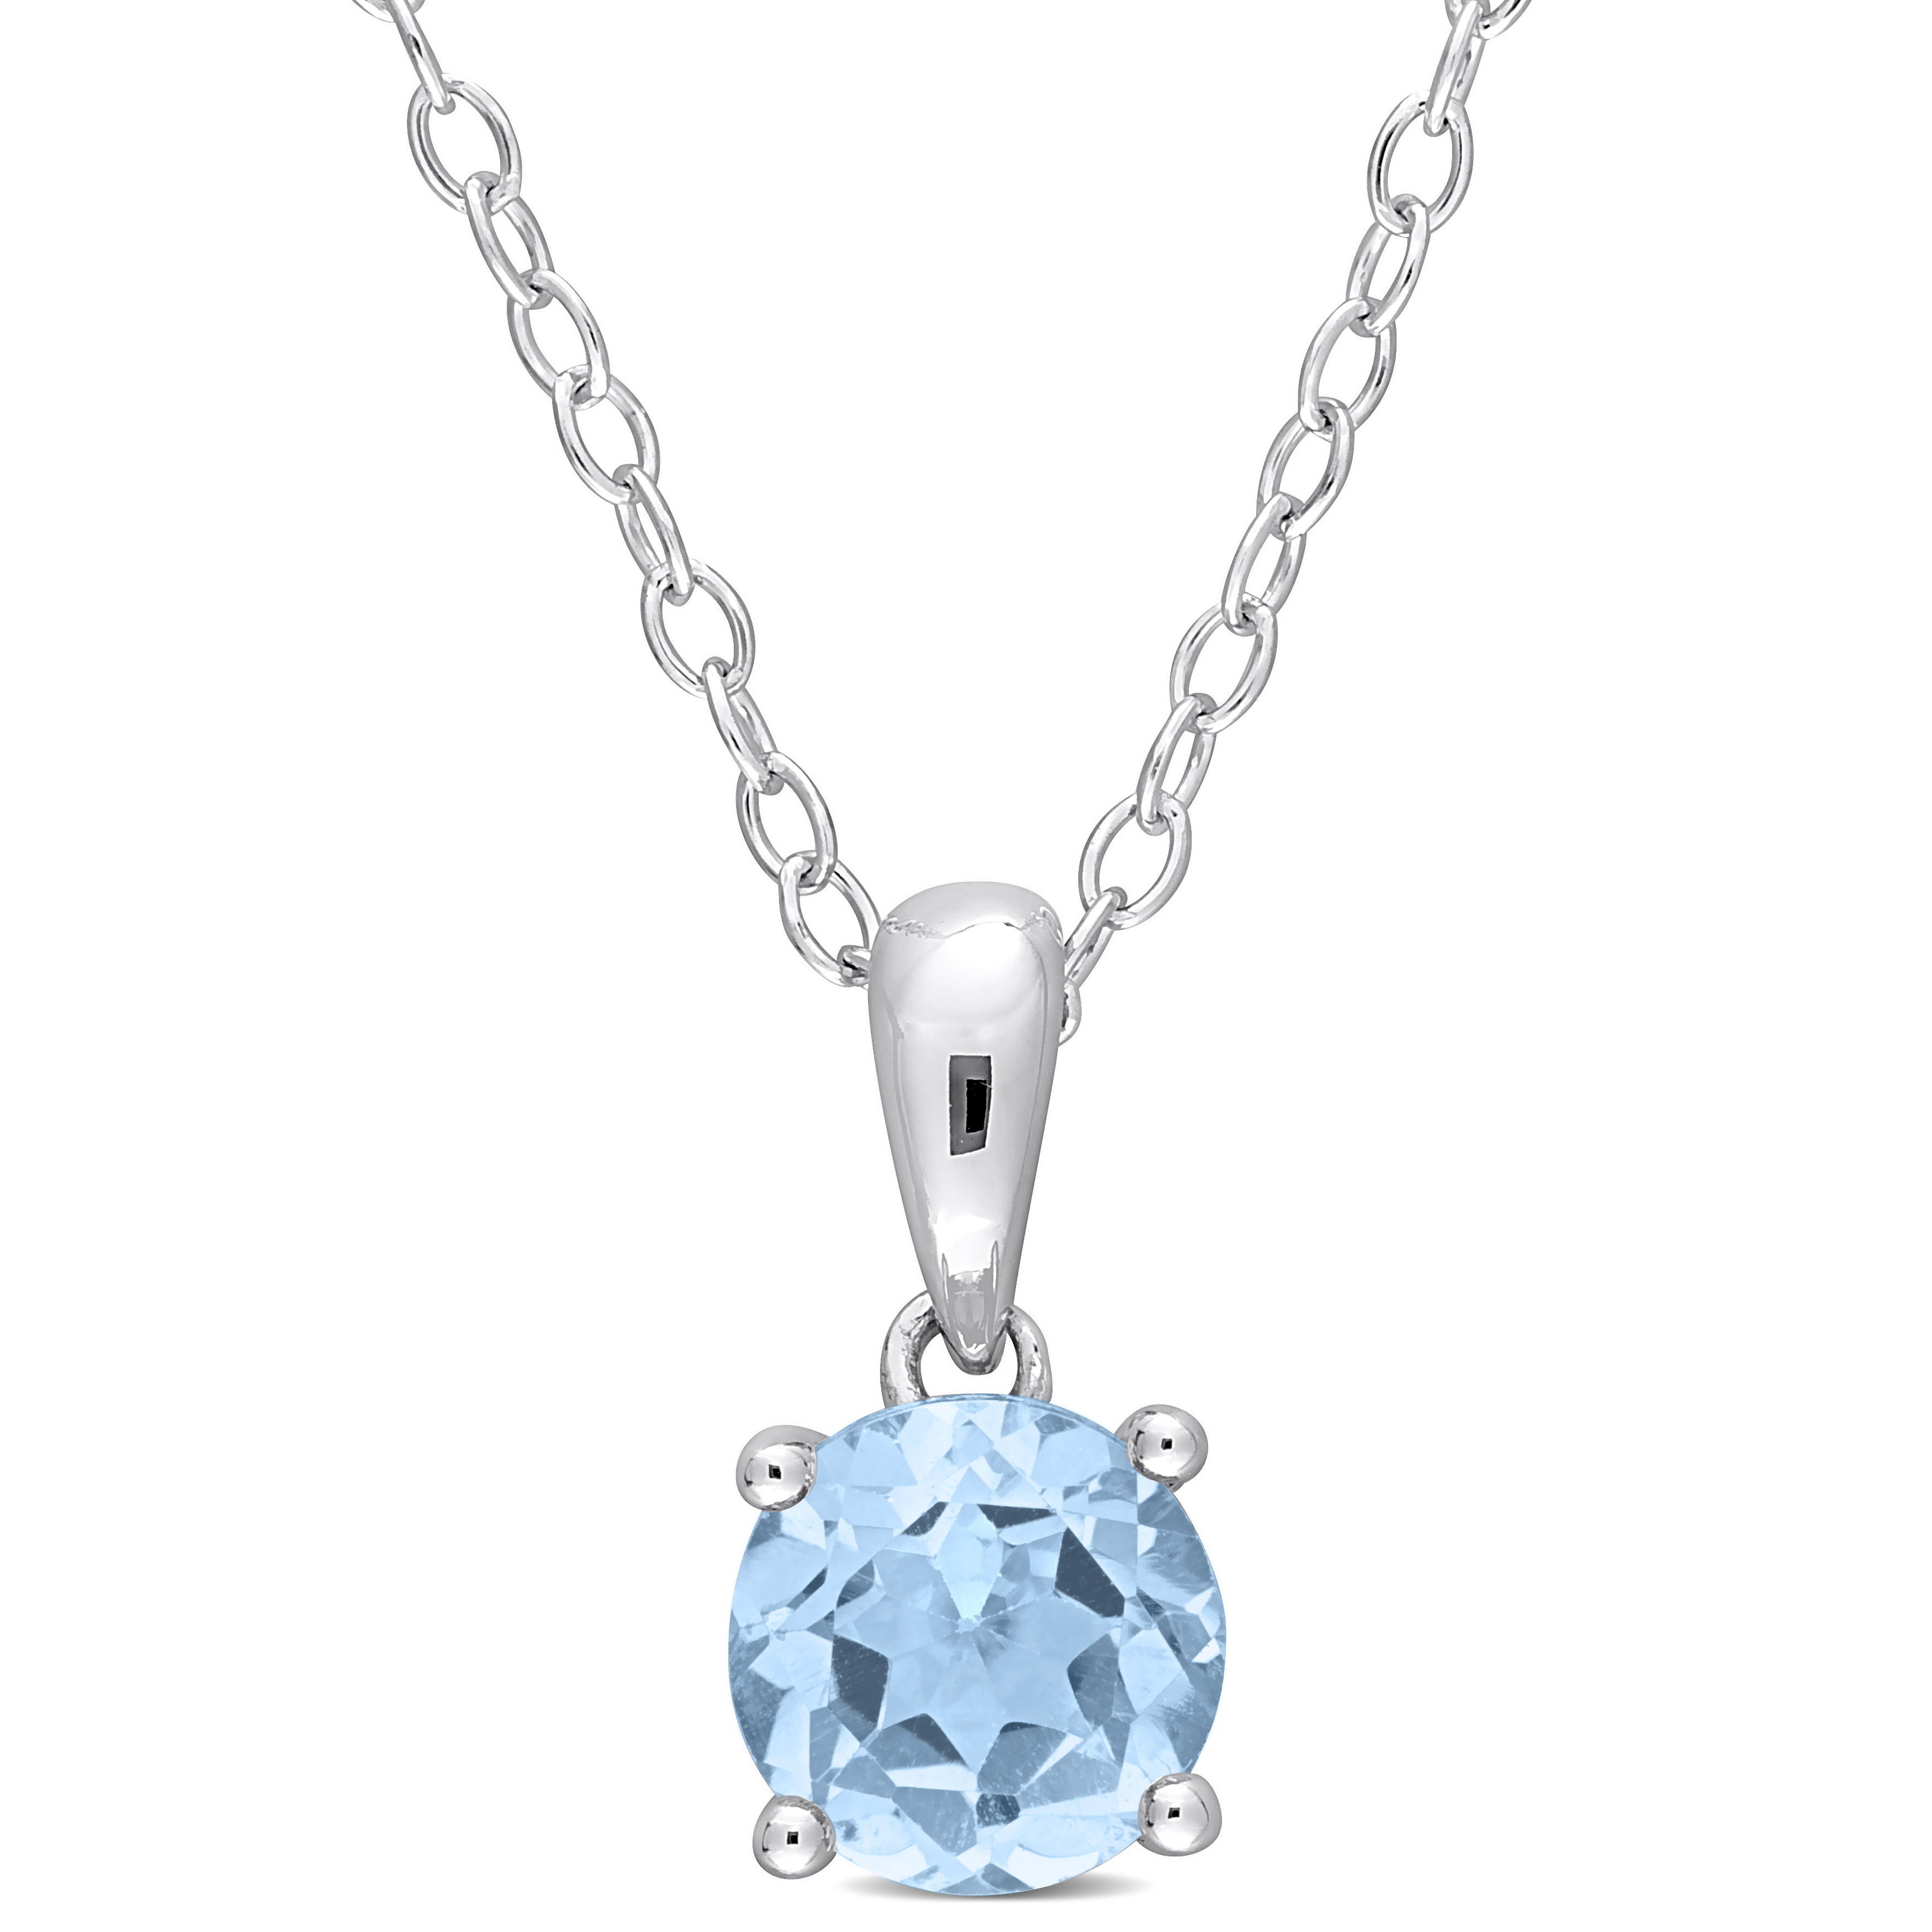 1 CT TGW Sky Blue Topaz Solitaire Heart Design Pendant with Chain in Sterling Silver - 18 in.